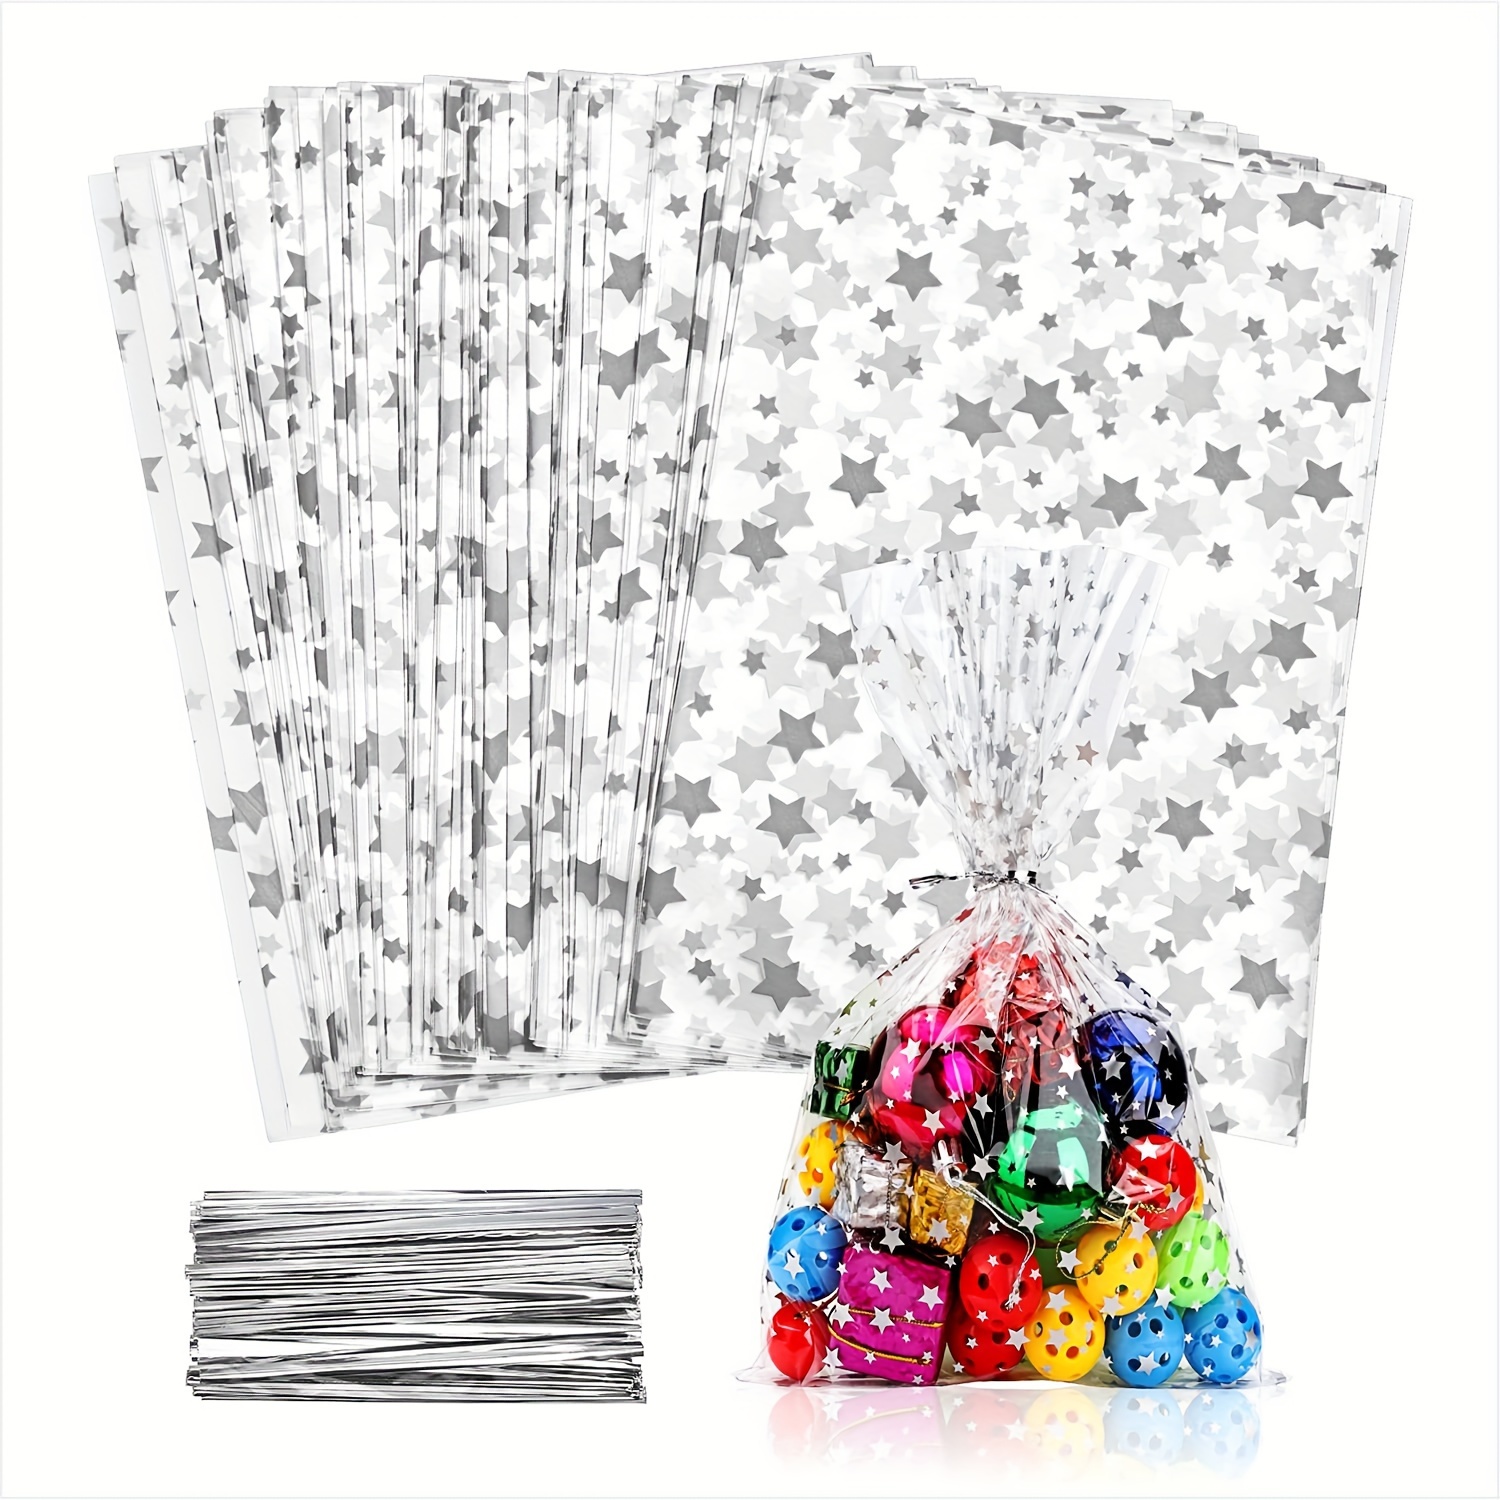 

50pcs, Clear 5.7"x 9.5" Flat Gift Wrap Cellophane Bags Cello Bags Cookie Bags Treat Bags With Twist Ties Poly Bag Cookie, Candies Silvery Star Printed